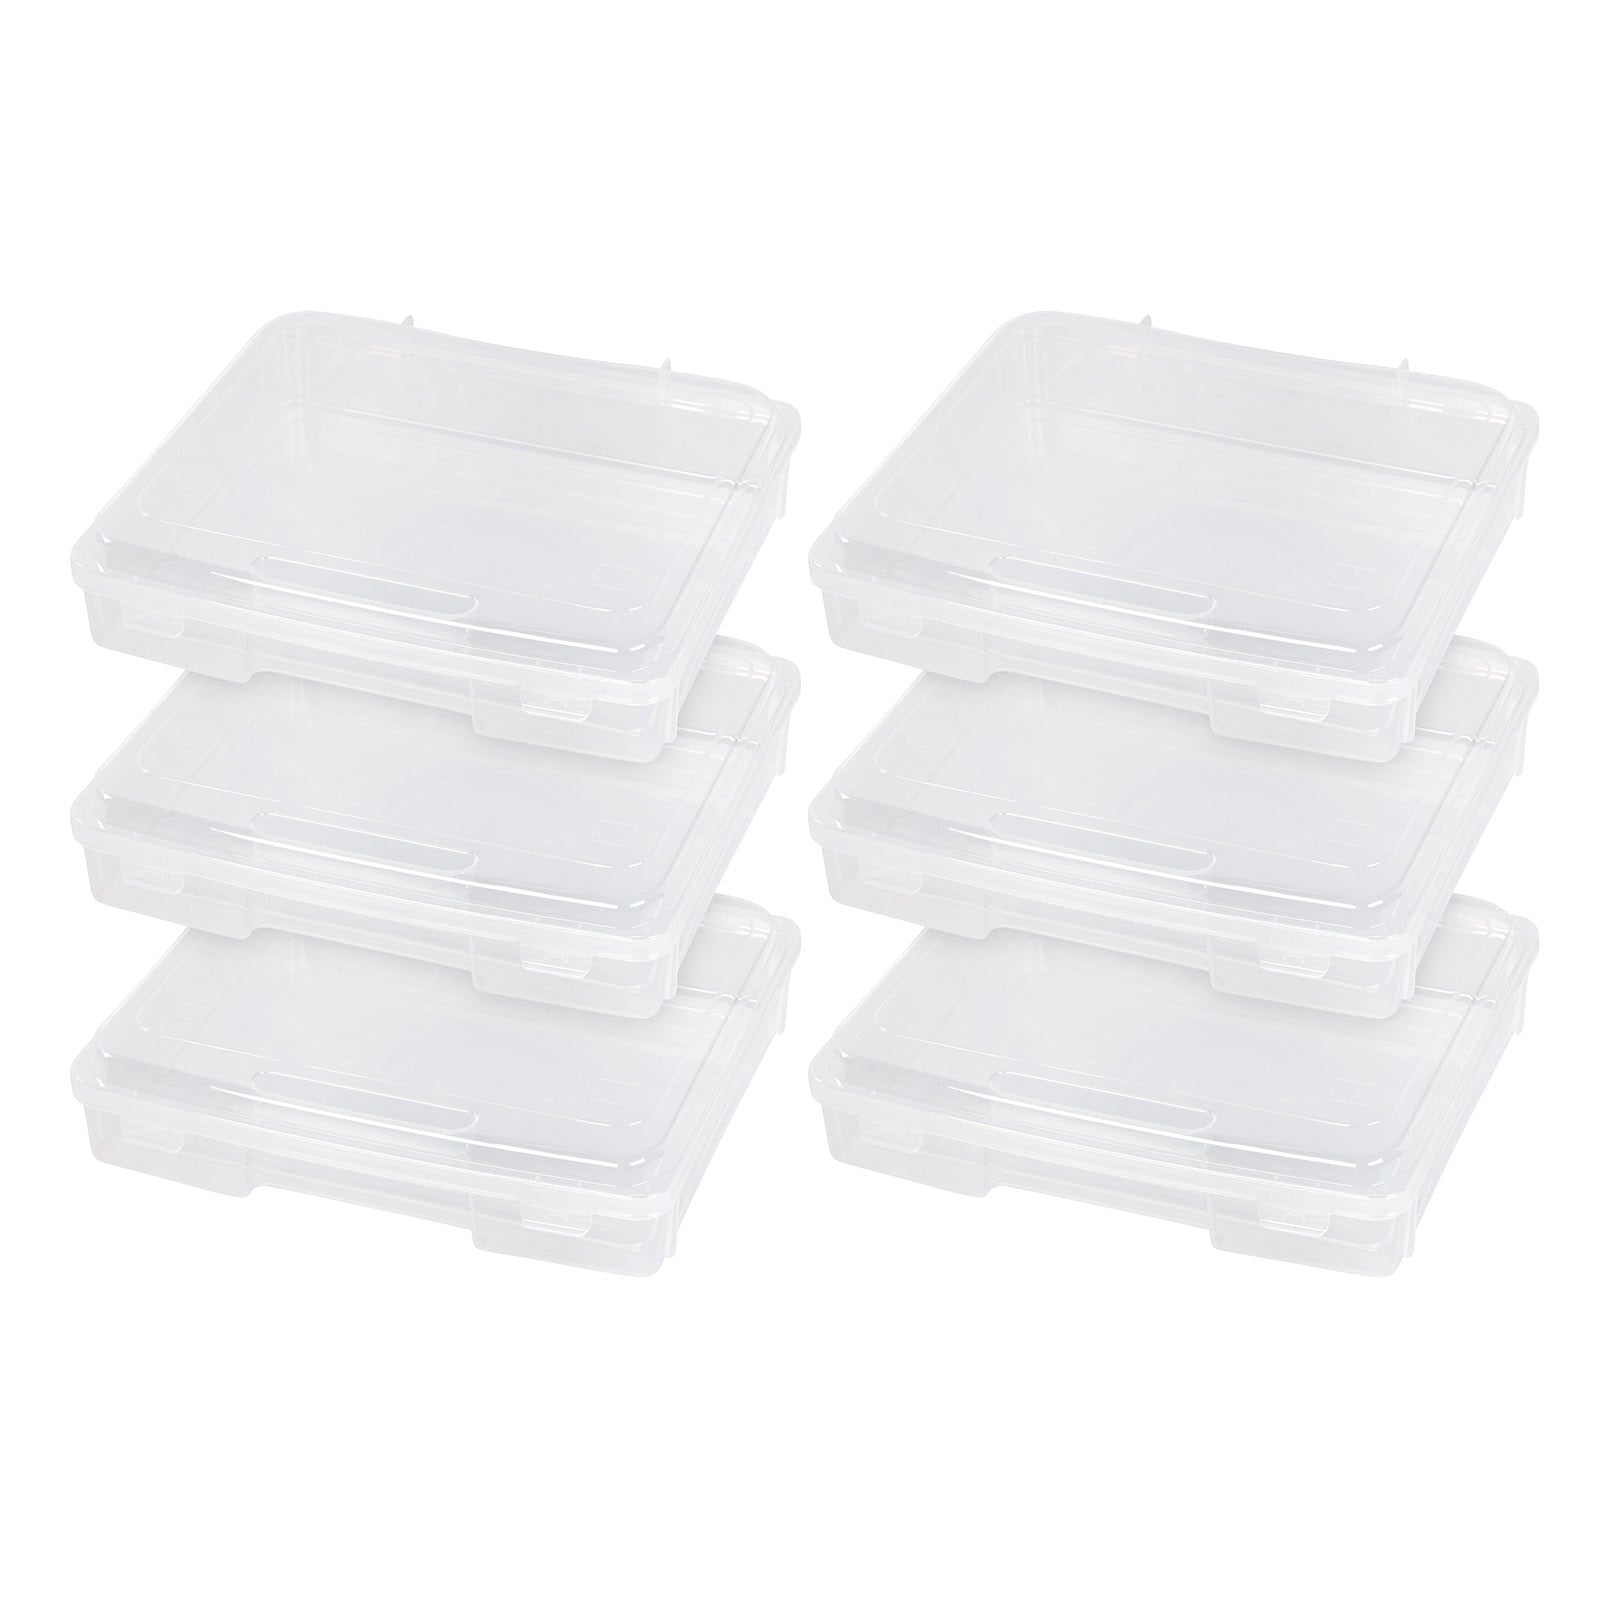 IRIS Portable Project Case in Clear (5-Pack) 580016 - The Home Depot